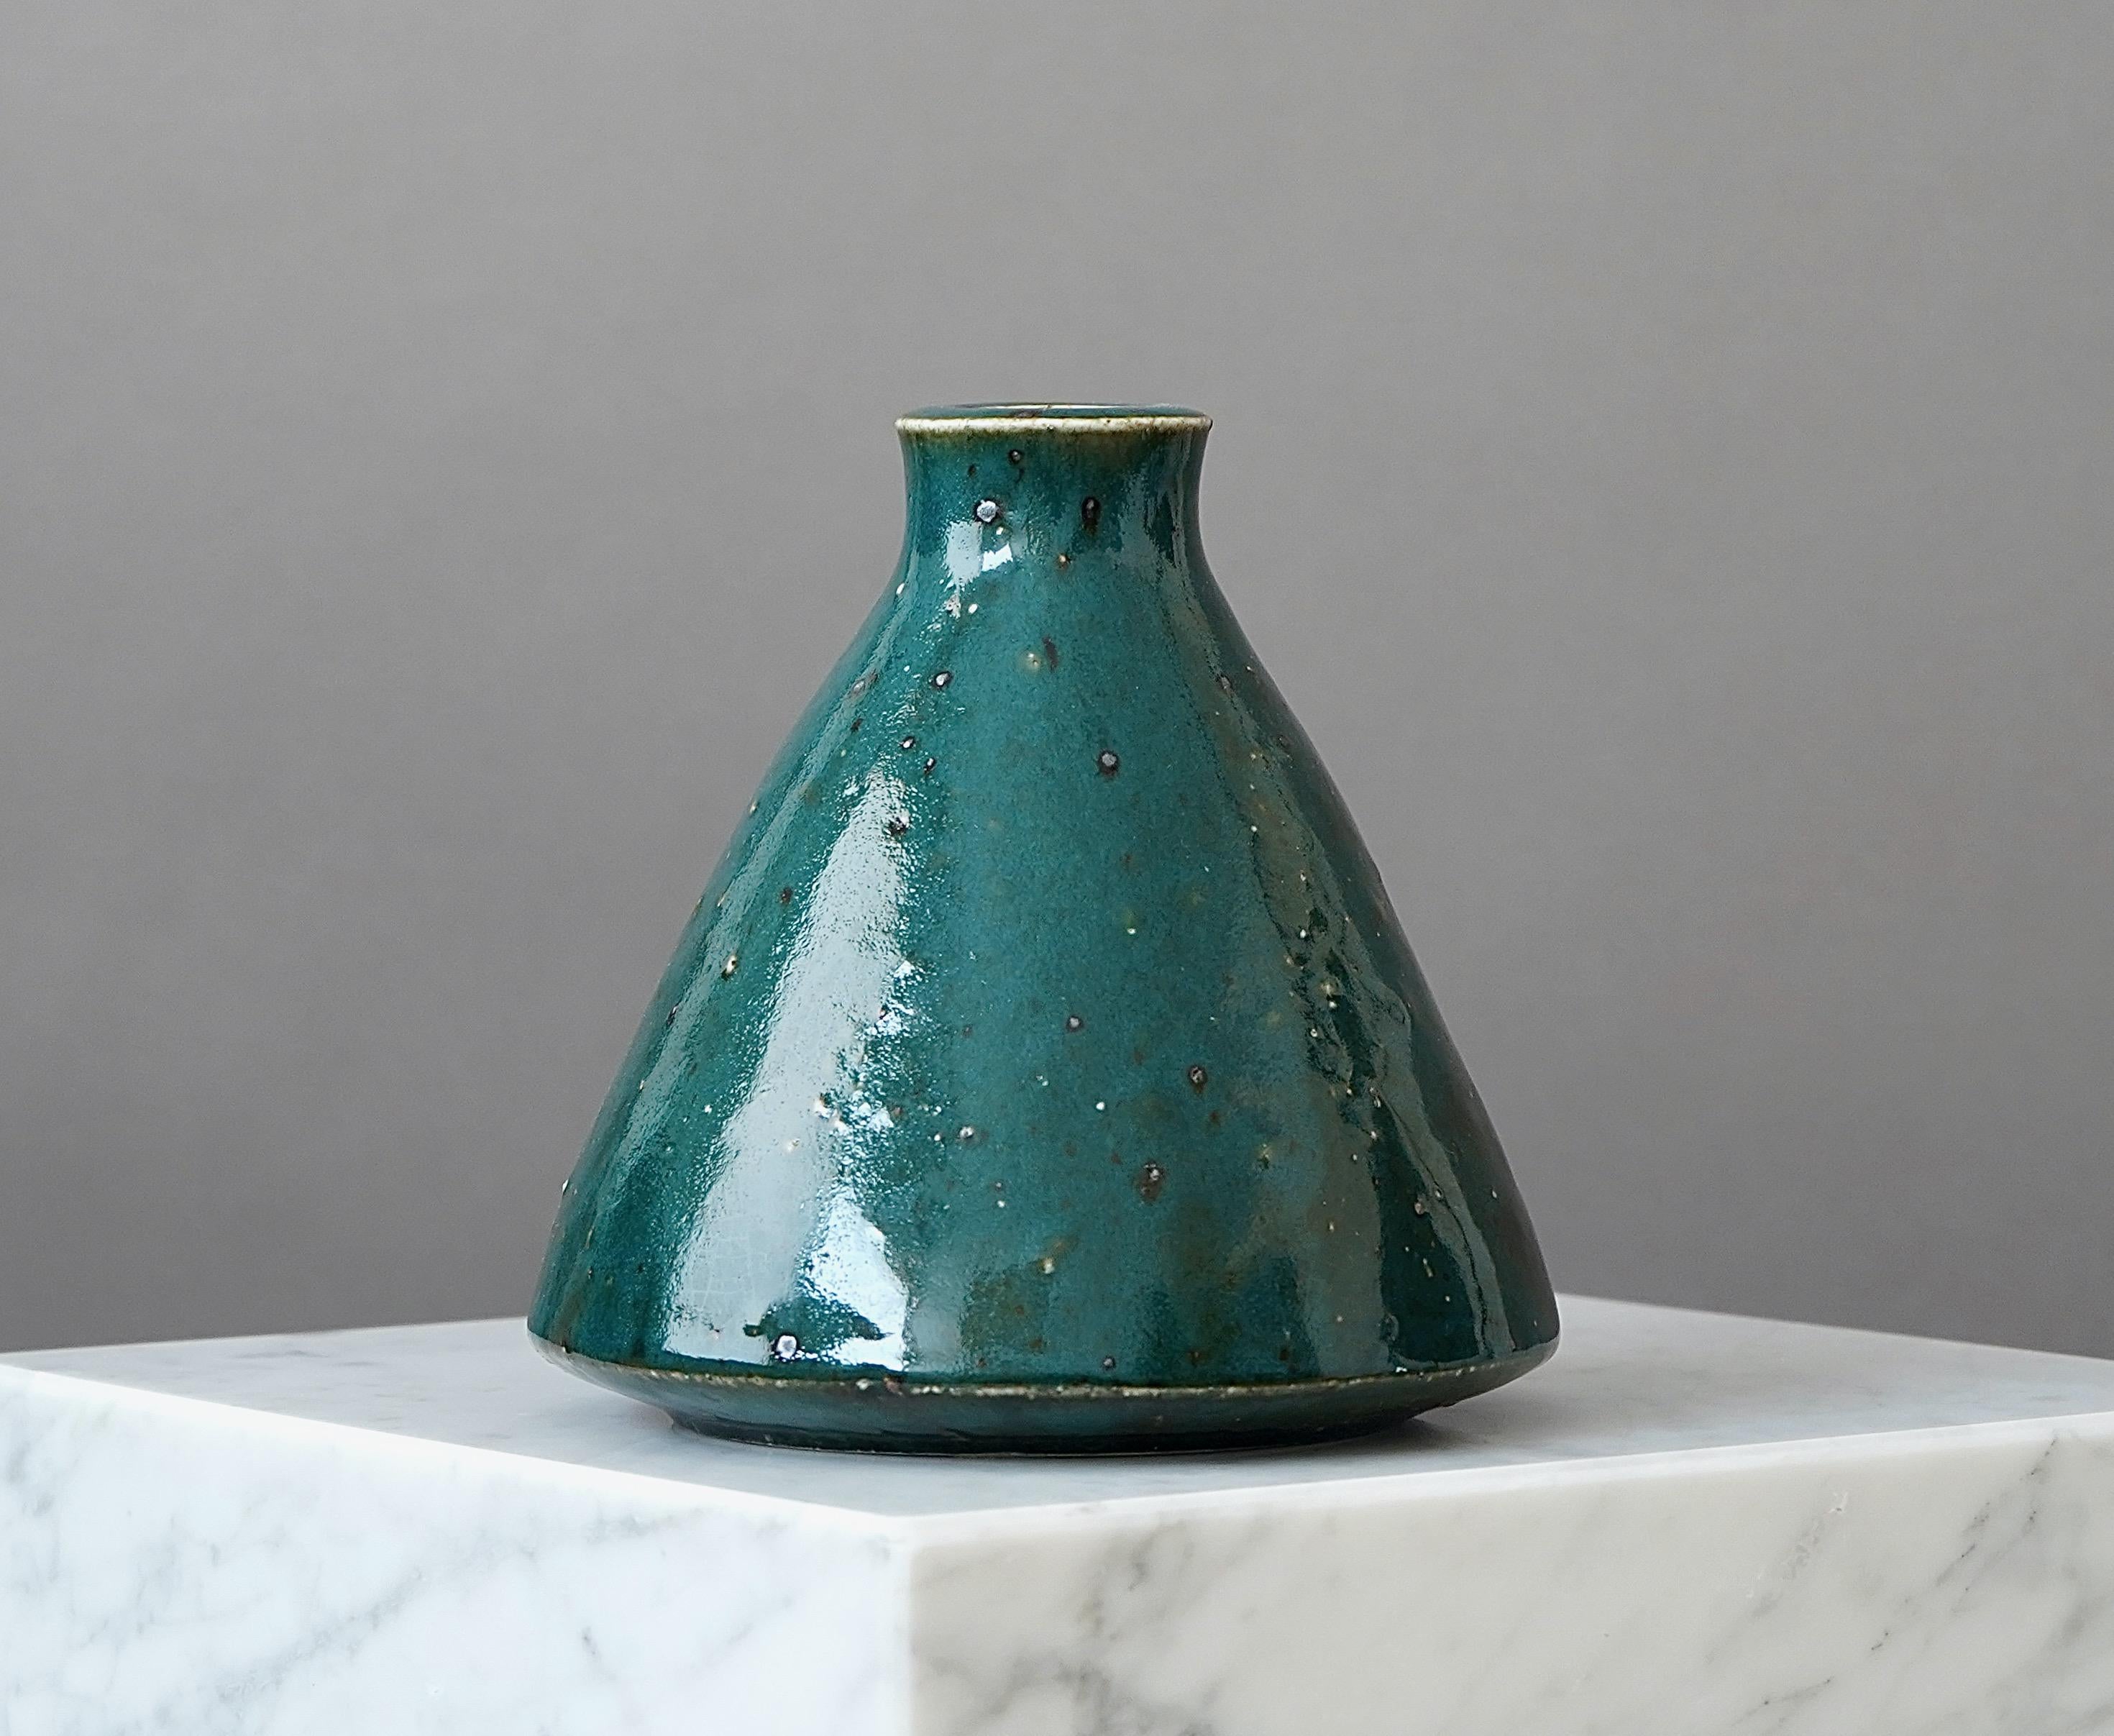 A beautiful stoneware vase with amazing glaze.
Made by Marianne Westman for Rorstrand, Sweden, 1960s.

Great condition. 
Incised signature 